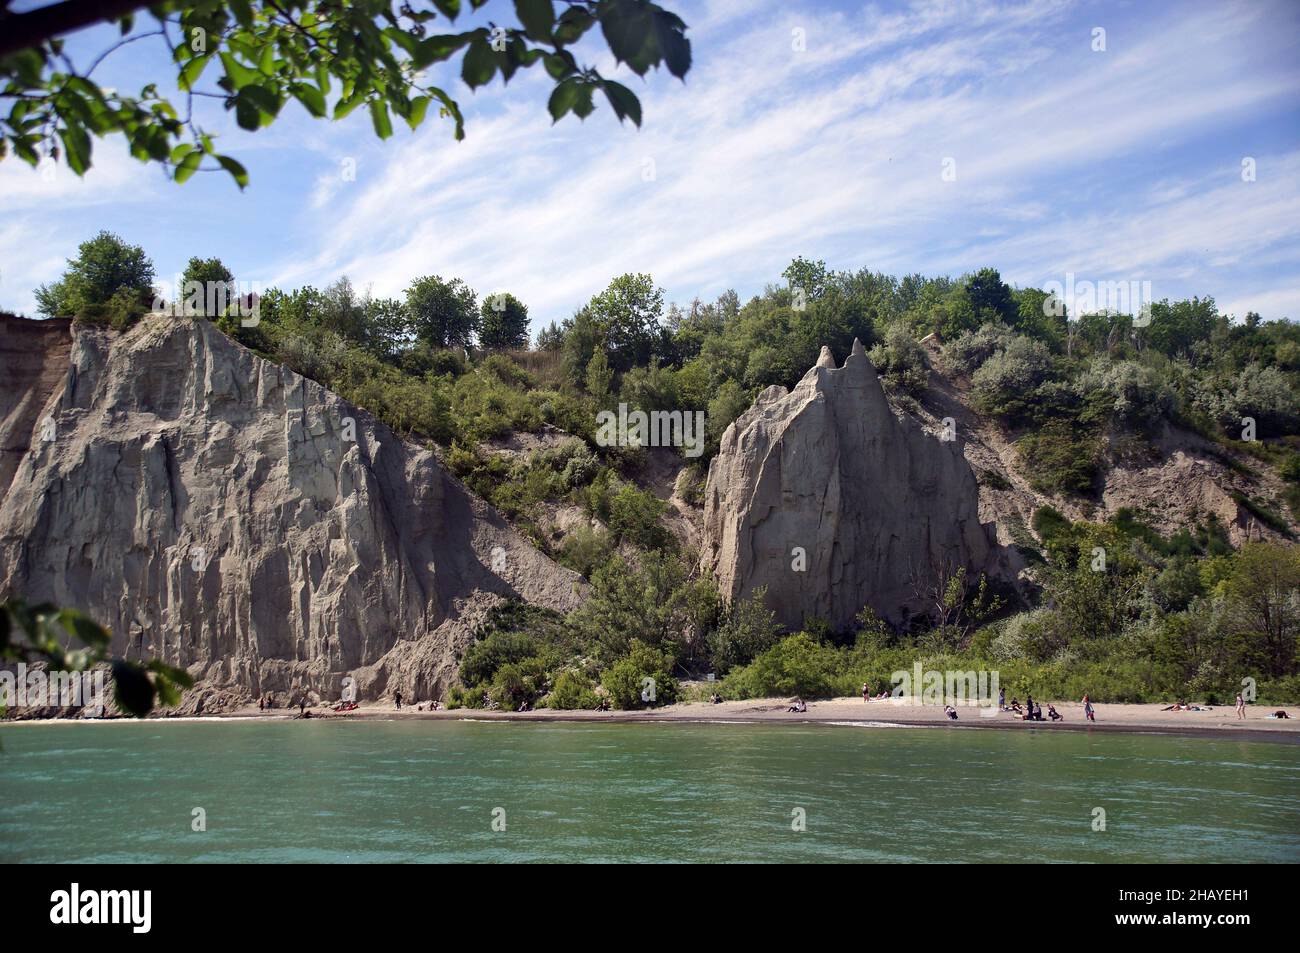 Summer view on the shoreline of the Lake Ontario in Scarborough Bluffs Park, the city's outdoor destination popular among the citizens of Toronto. Stock Photo